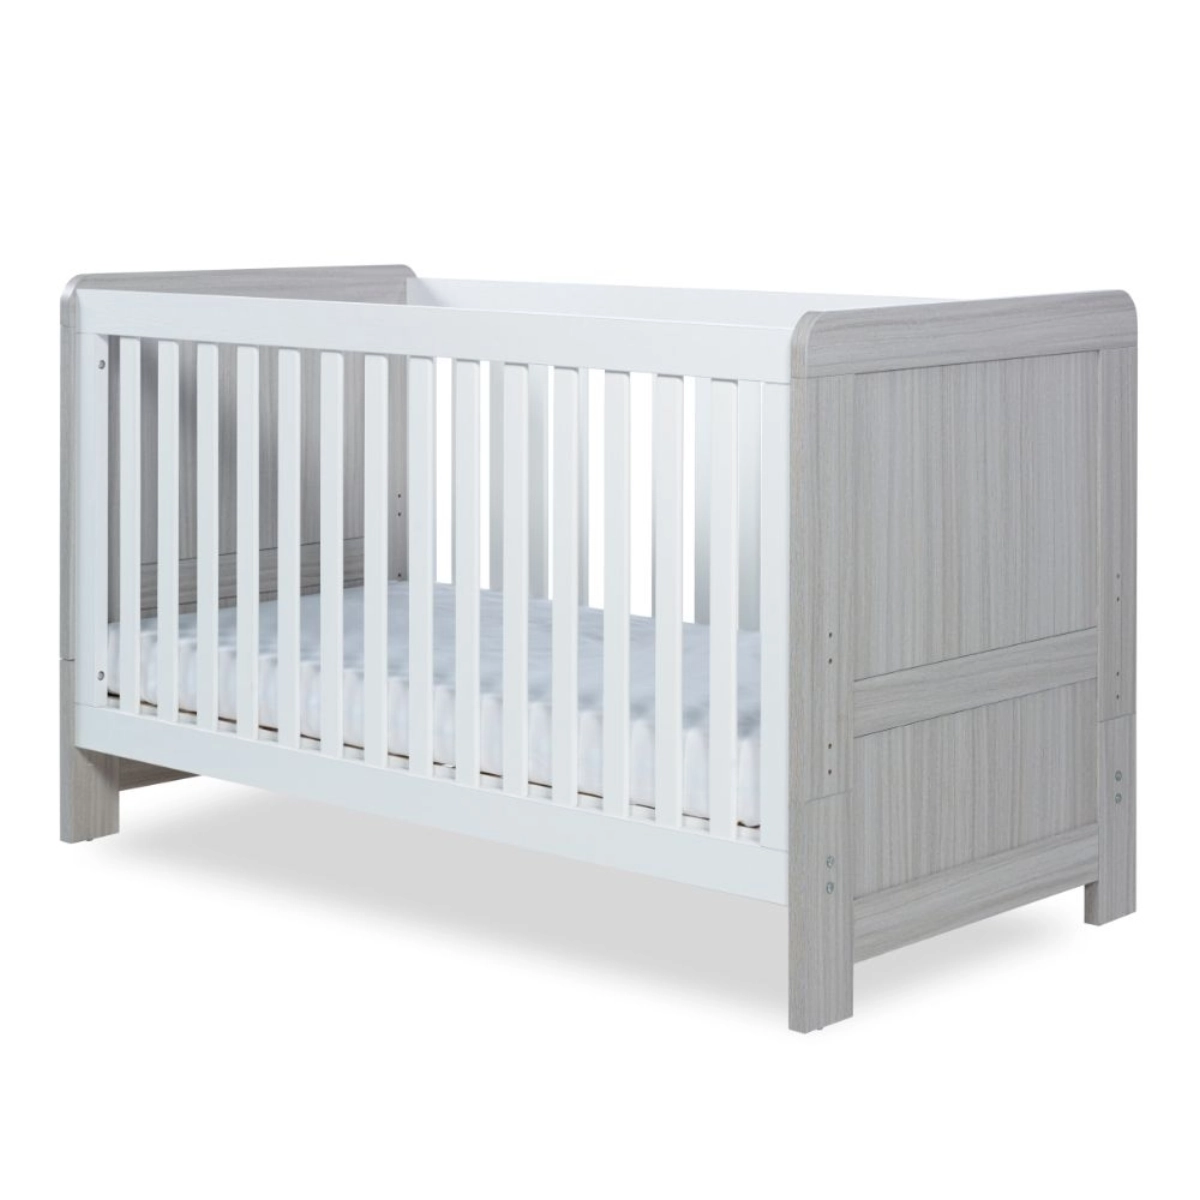 Image of Ickle Bubba Pembrey Cot Bed-Ash Grey & White